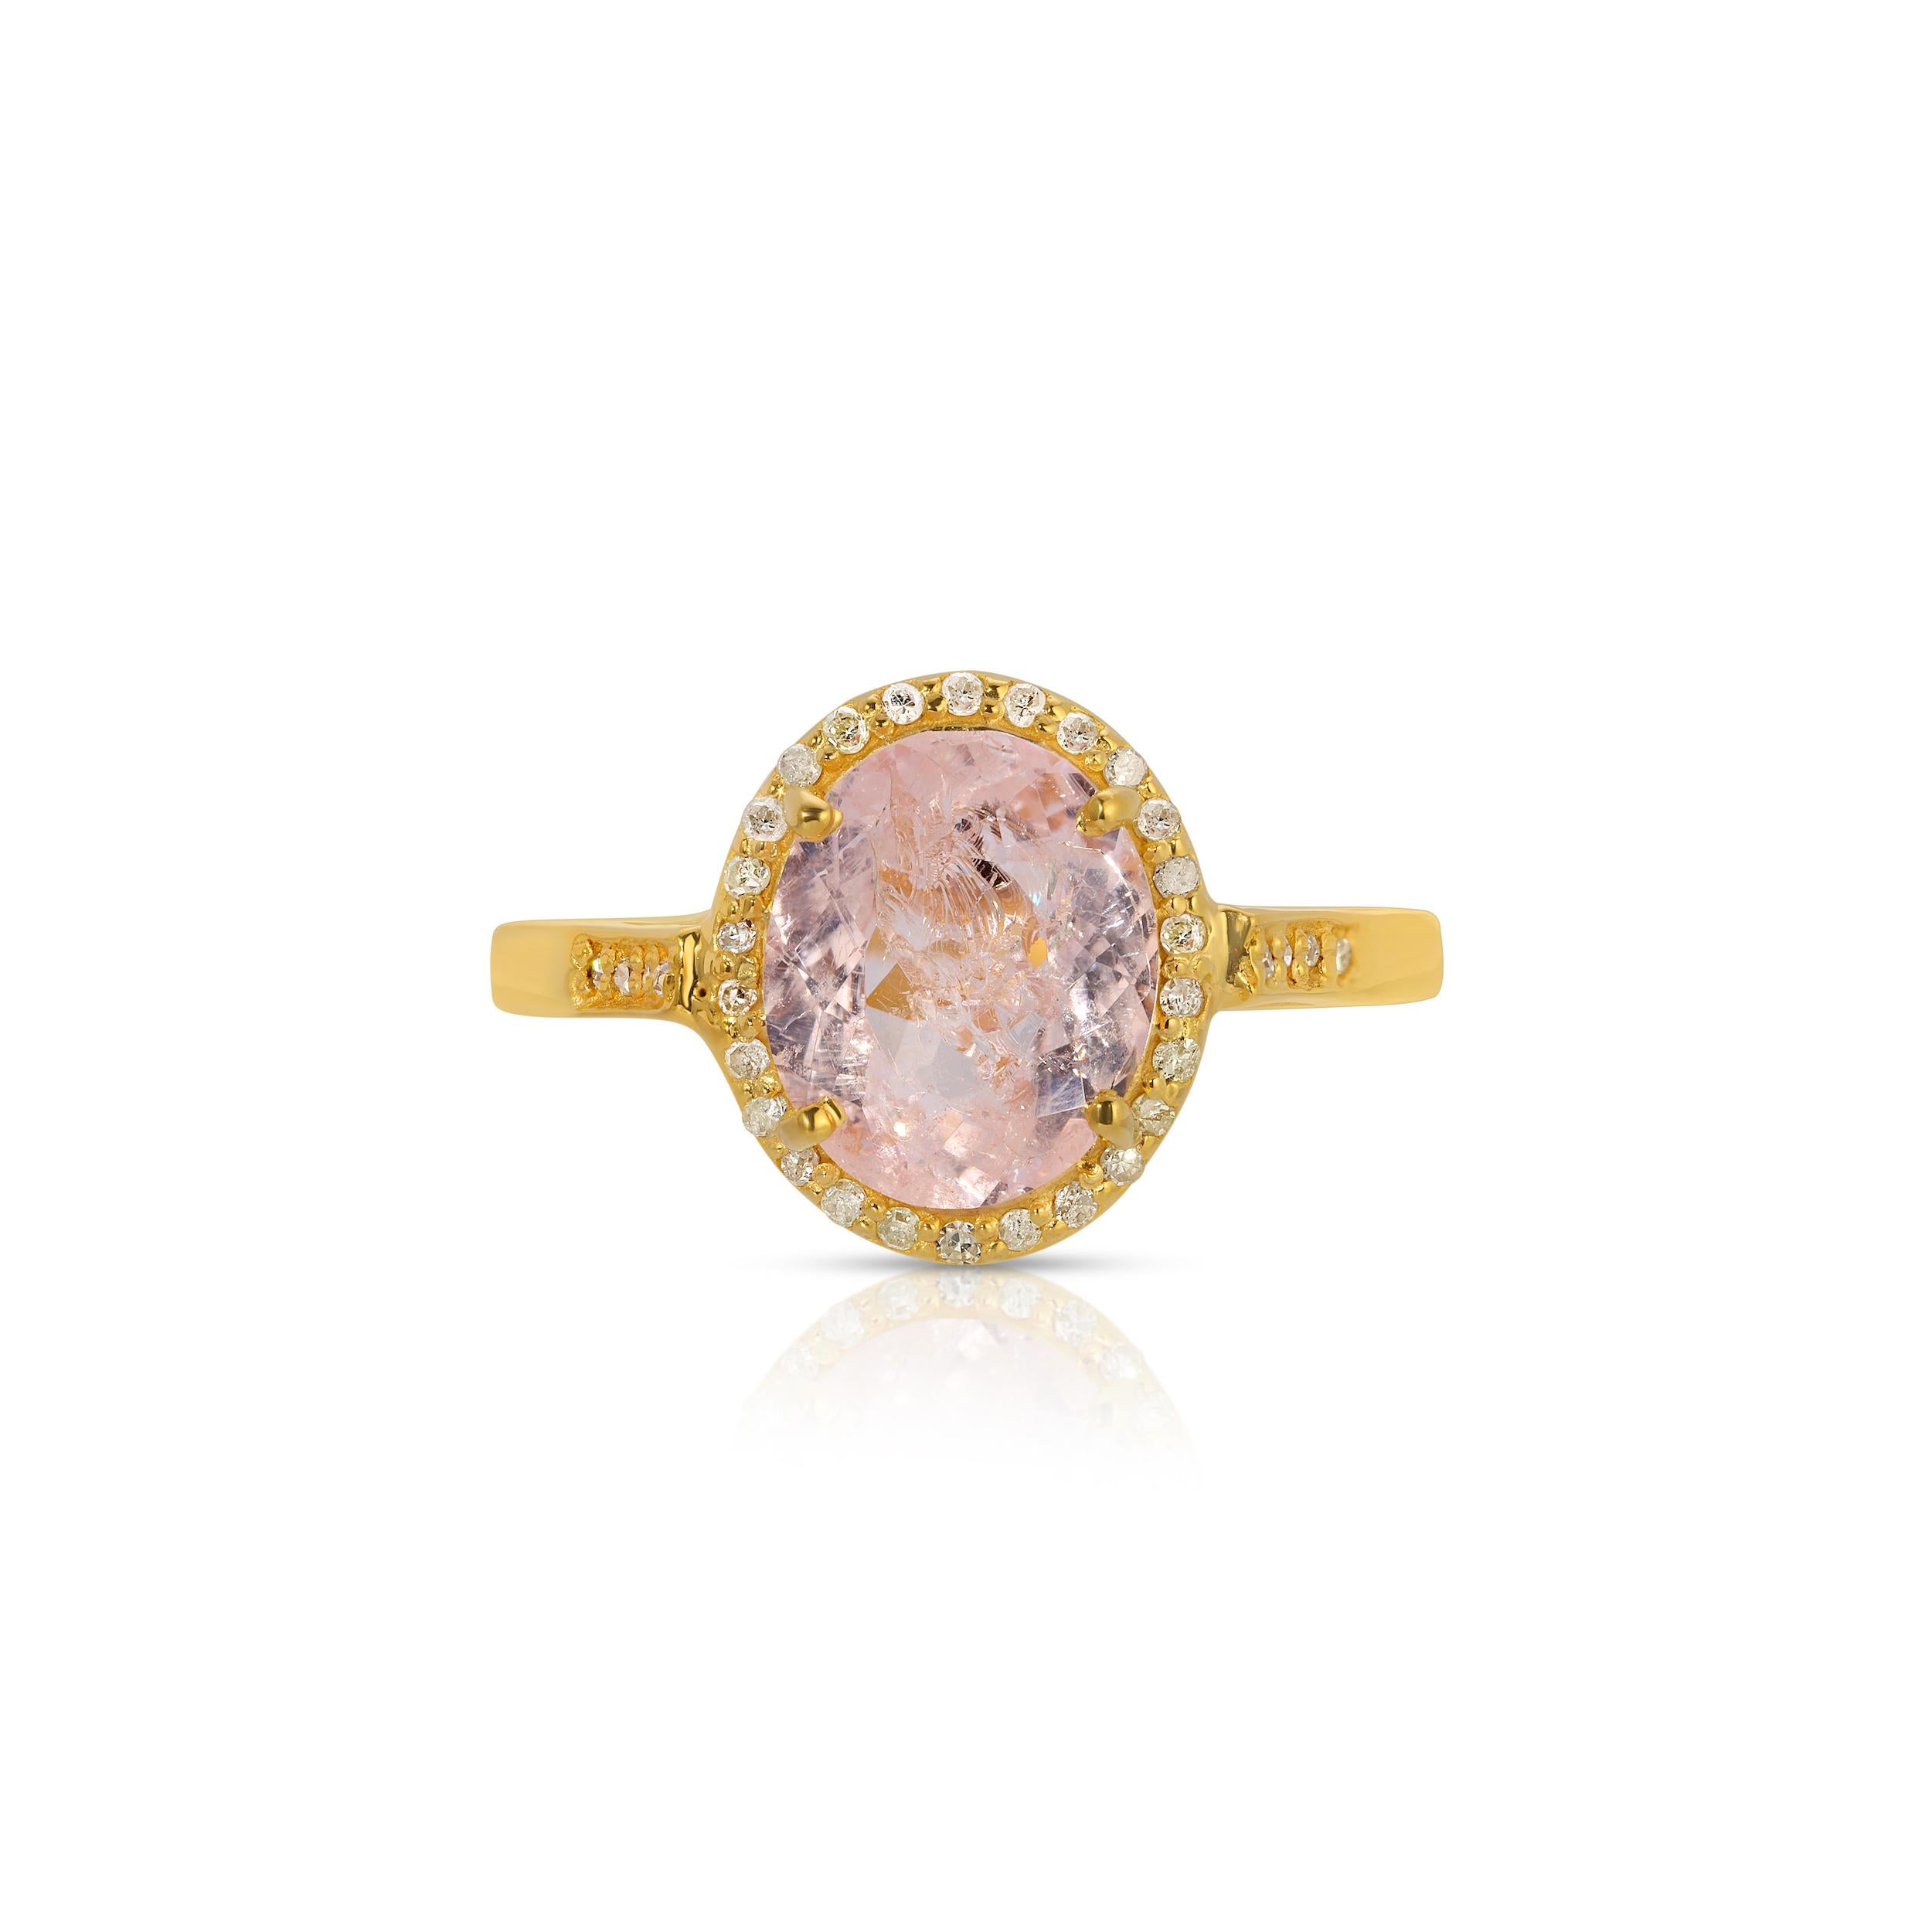 A timeless cocktail ring of contemporary design featuring a mix of gemstones. This ring features a luminous 2.26 Carat pink Morganite in a bezel setting of White Diamonds on a gold band also set with Diamonds. This ring has a total Diamond weight of